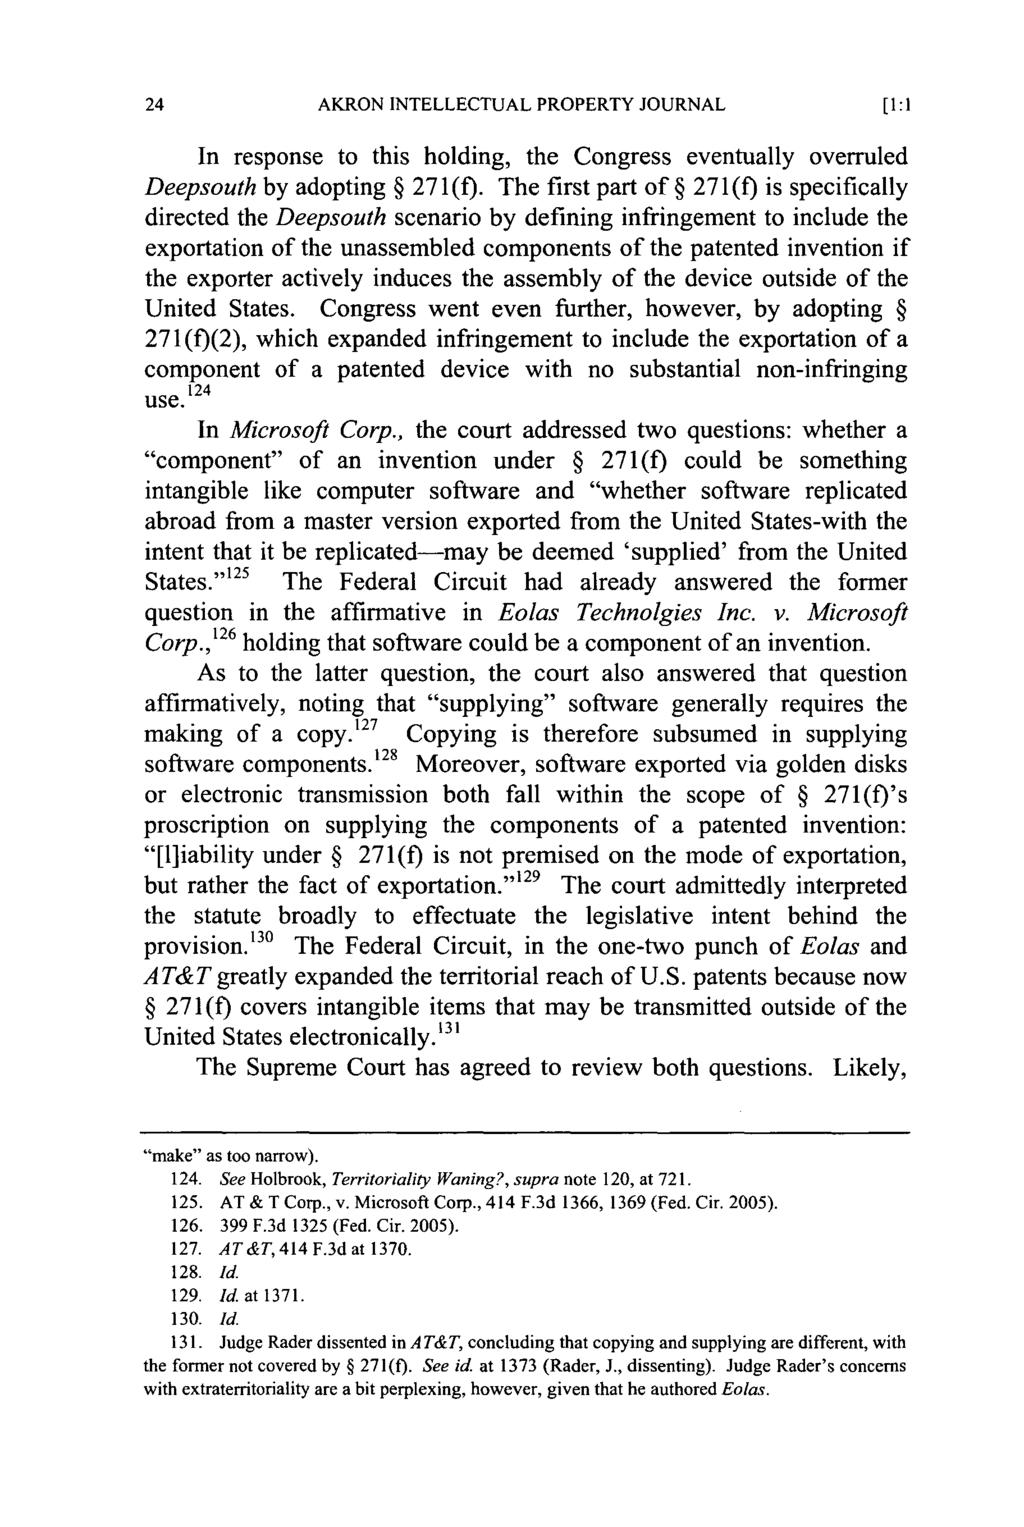 Akron Intellectual Property Journal, Vol. 1 [2007], Iss. 1, Art. 1 AKRON INTELLECTUAL PROPERTY JOURNAL In response to this holding, the Congress eventually overruled Deepsouth by adopting 271(f).